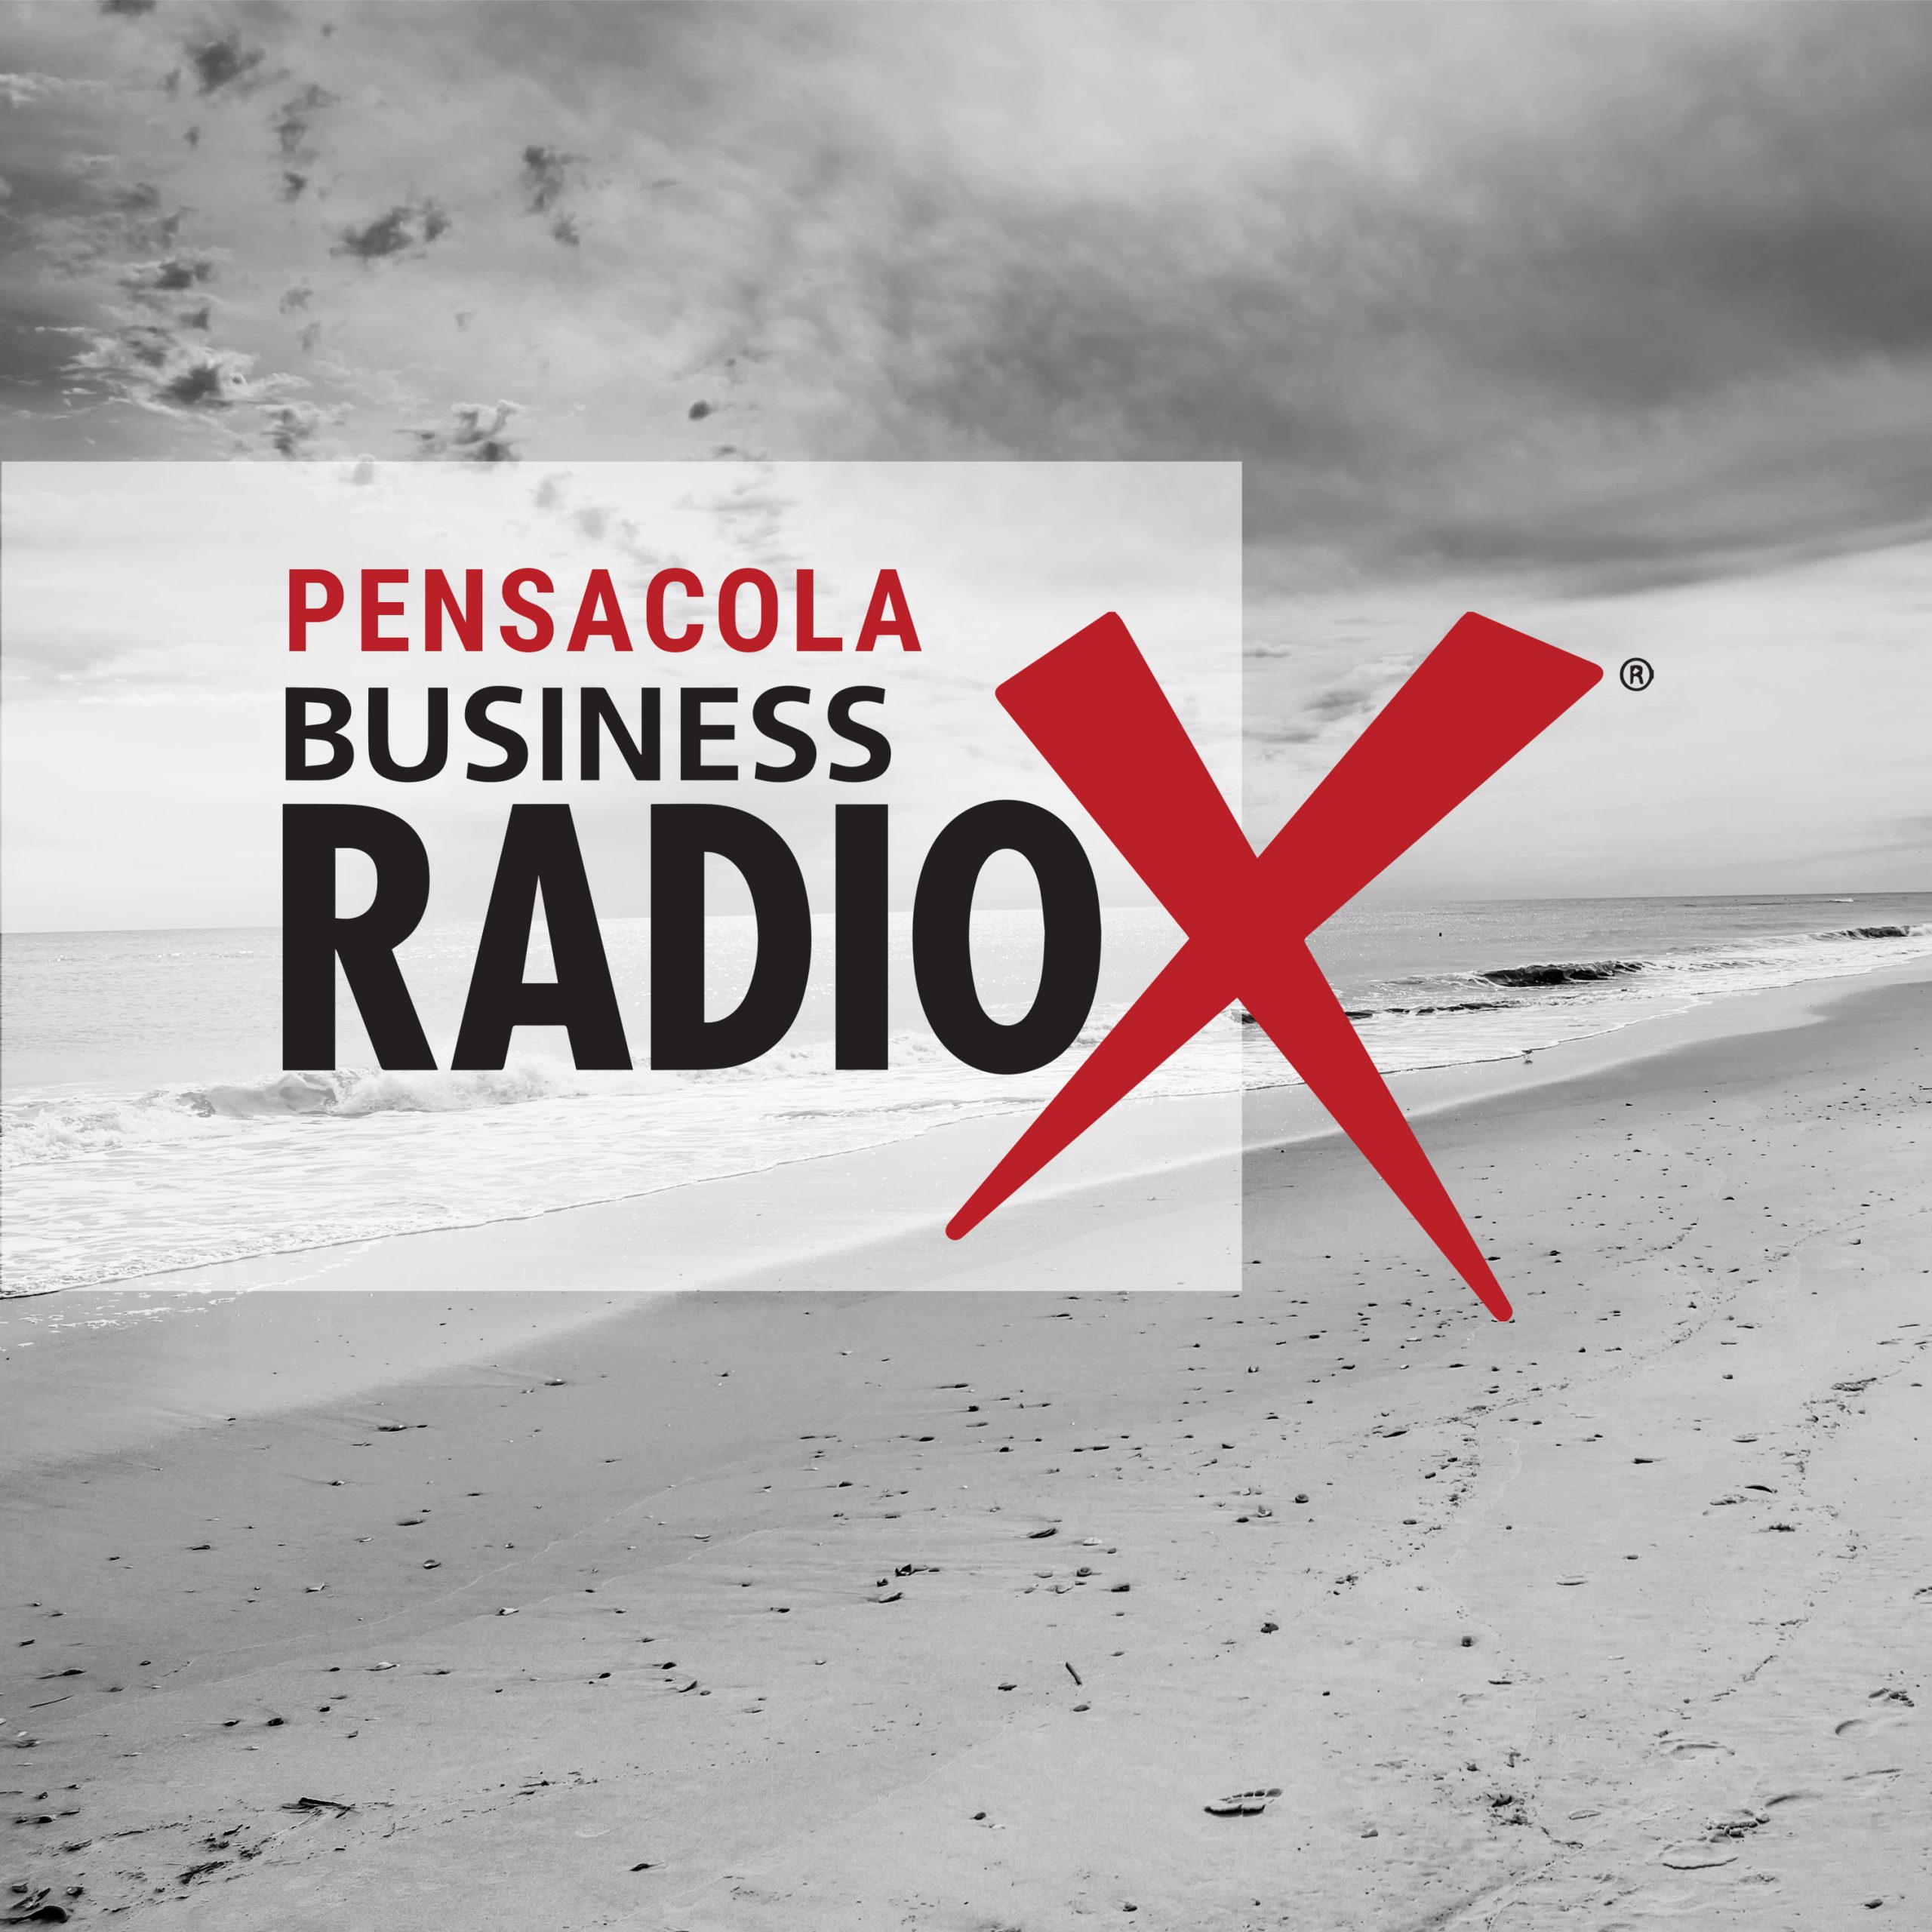 Pensacola Business Radio: 6.23.16 Guests:Dana A. Oliver/ Senior Director of Research & Development at Medtronic